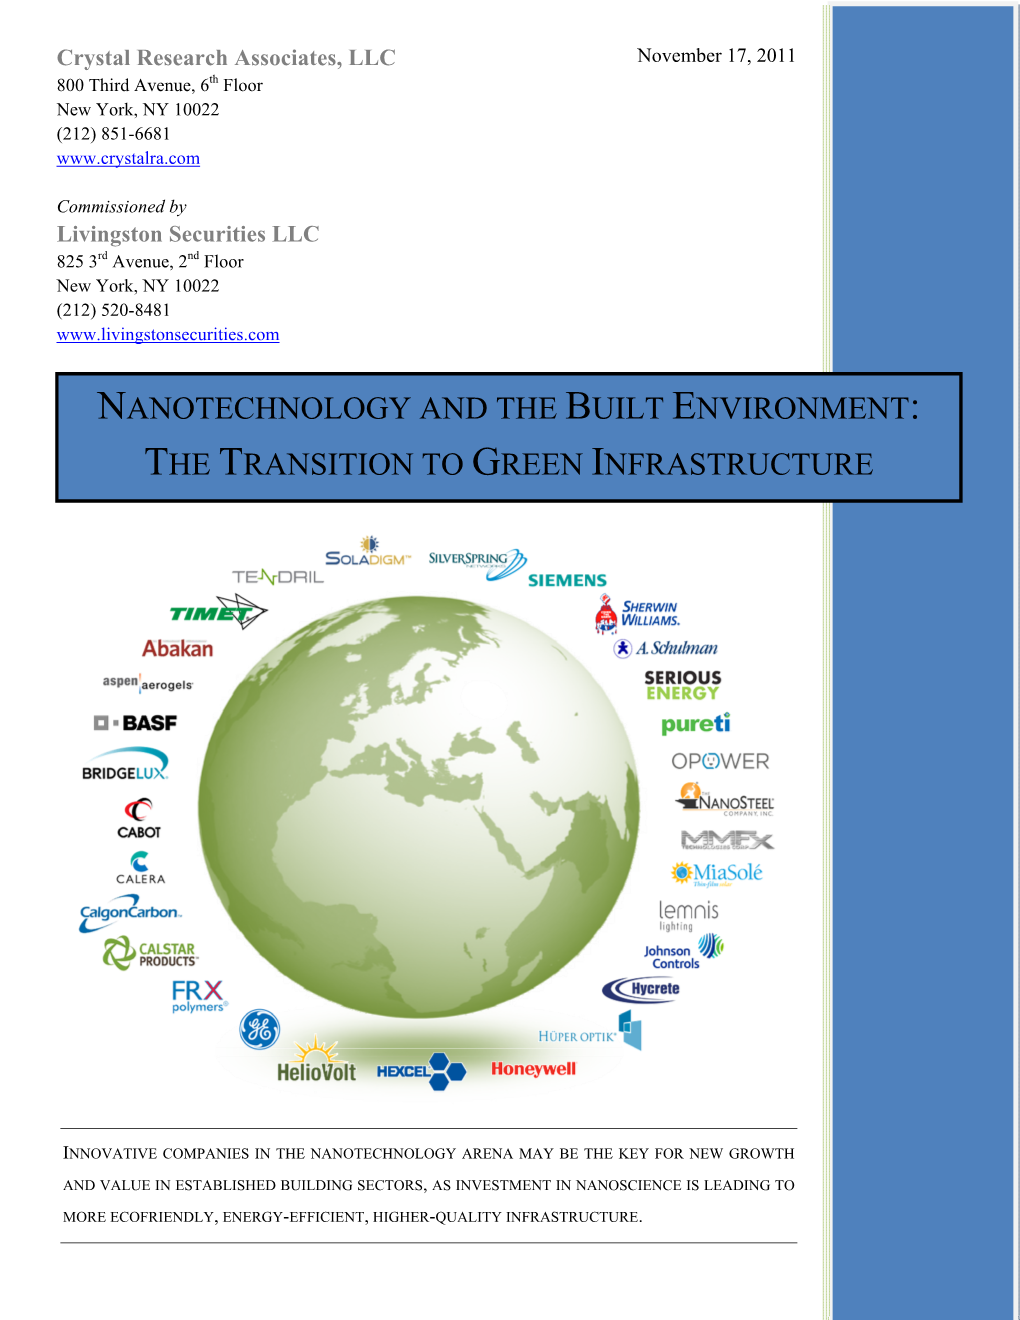 Nanotechnology and the Built Environment: the Transition to Green Infrastructure